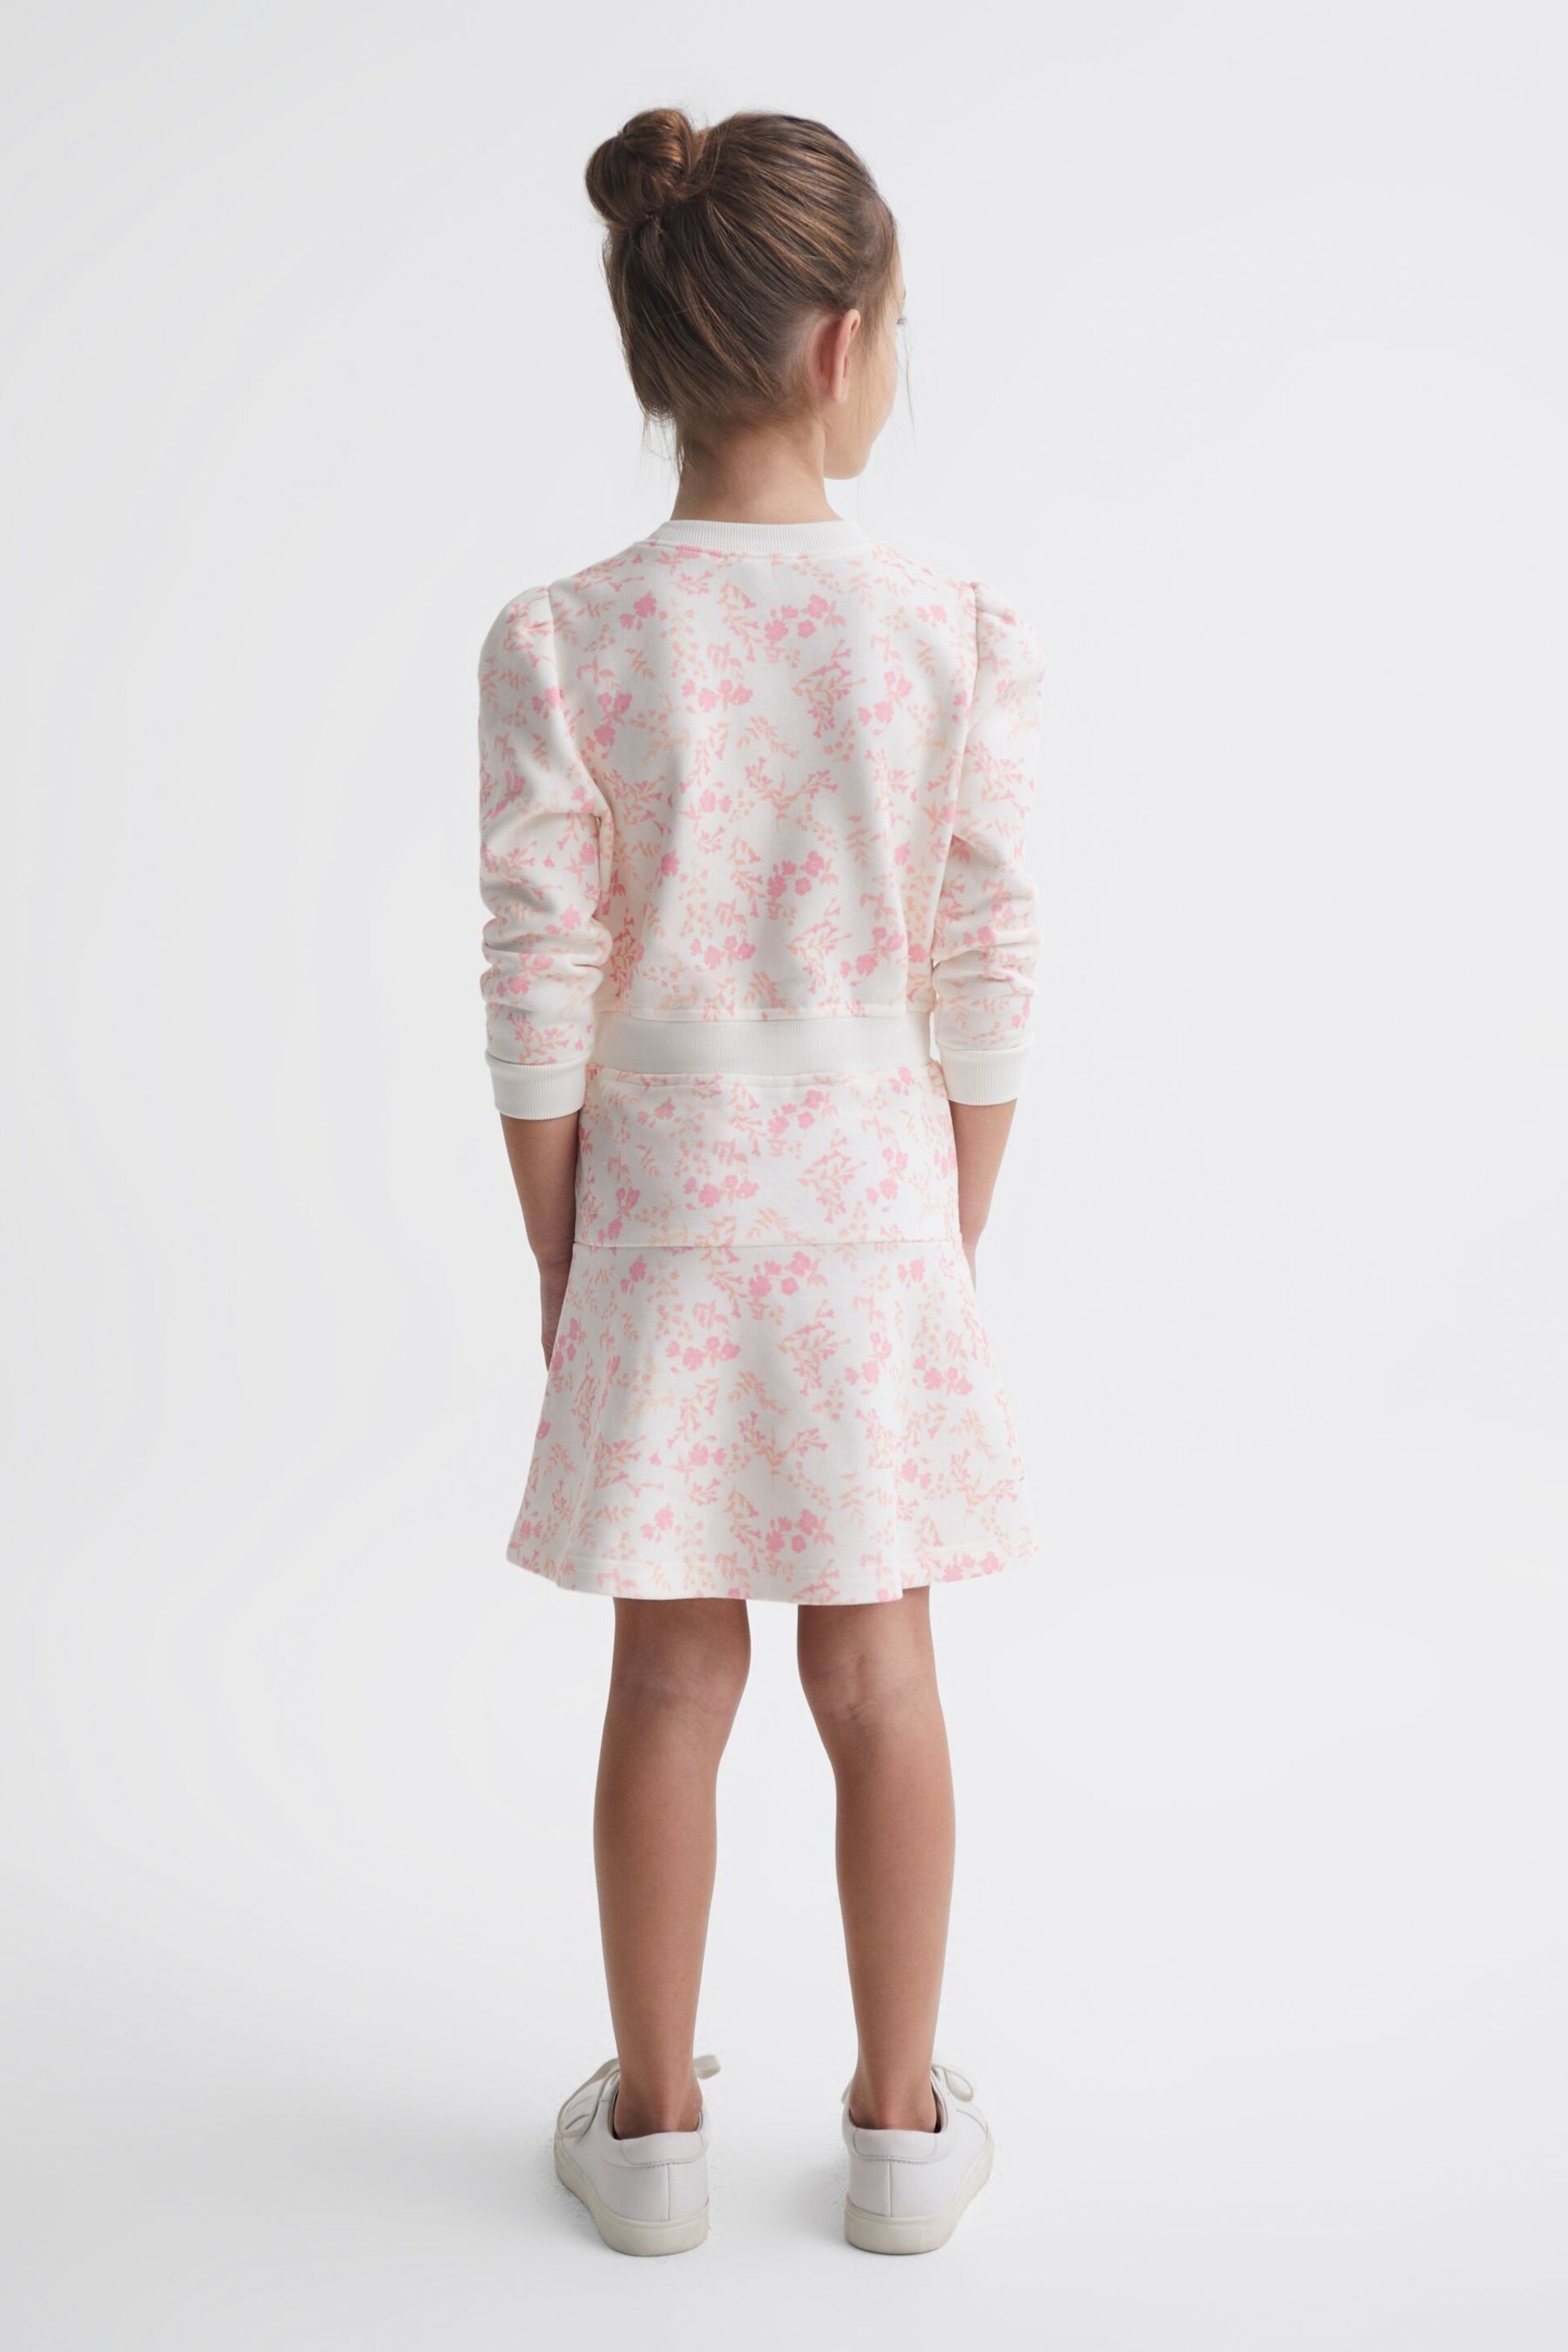 Reiss Pink Print Maeve Senior Relaxed Jersey Dress - Image 5 of 7